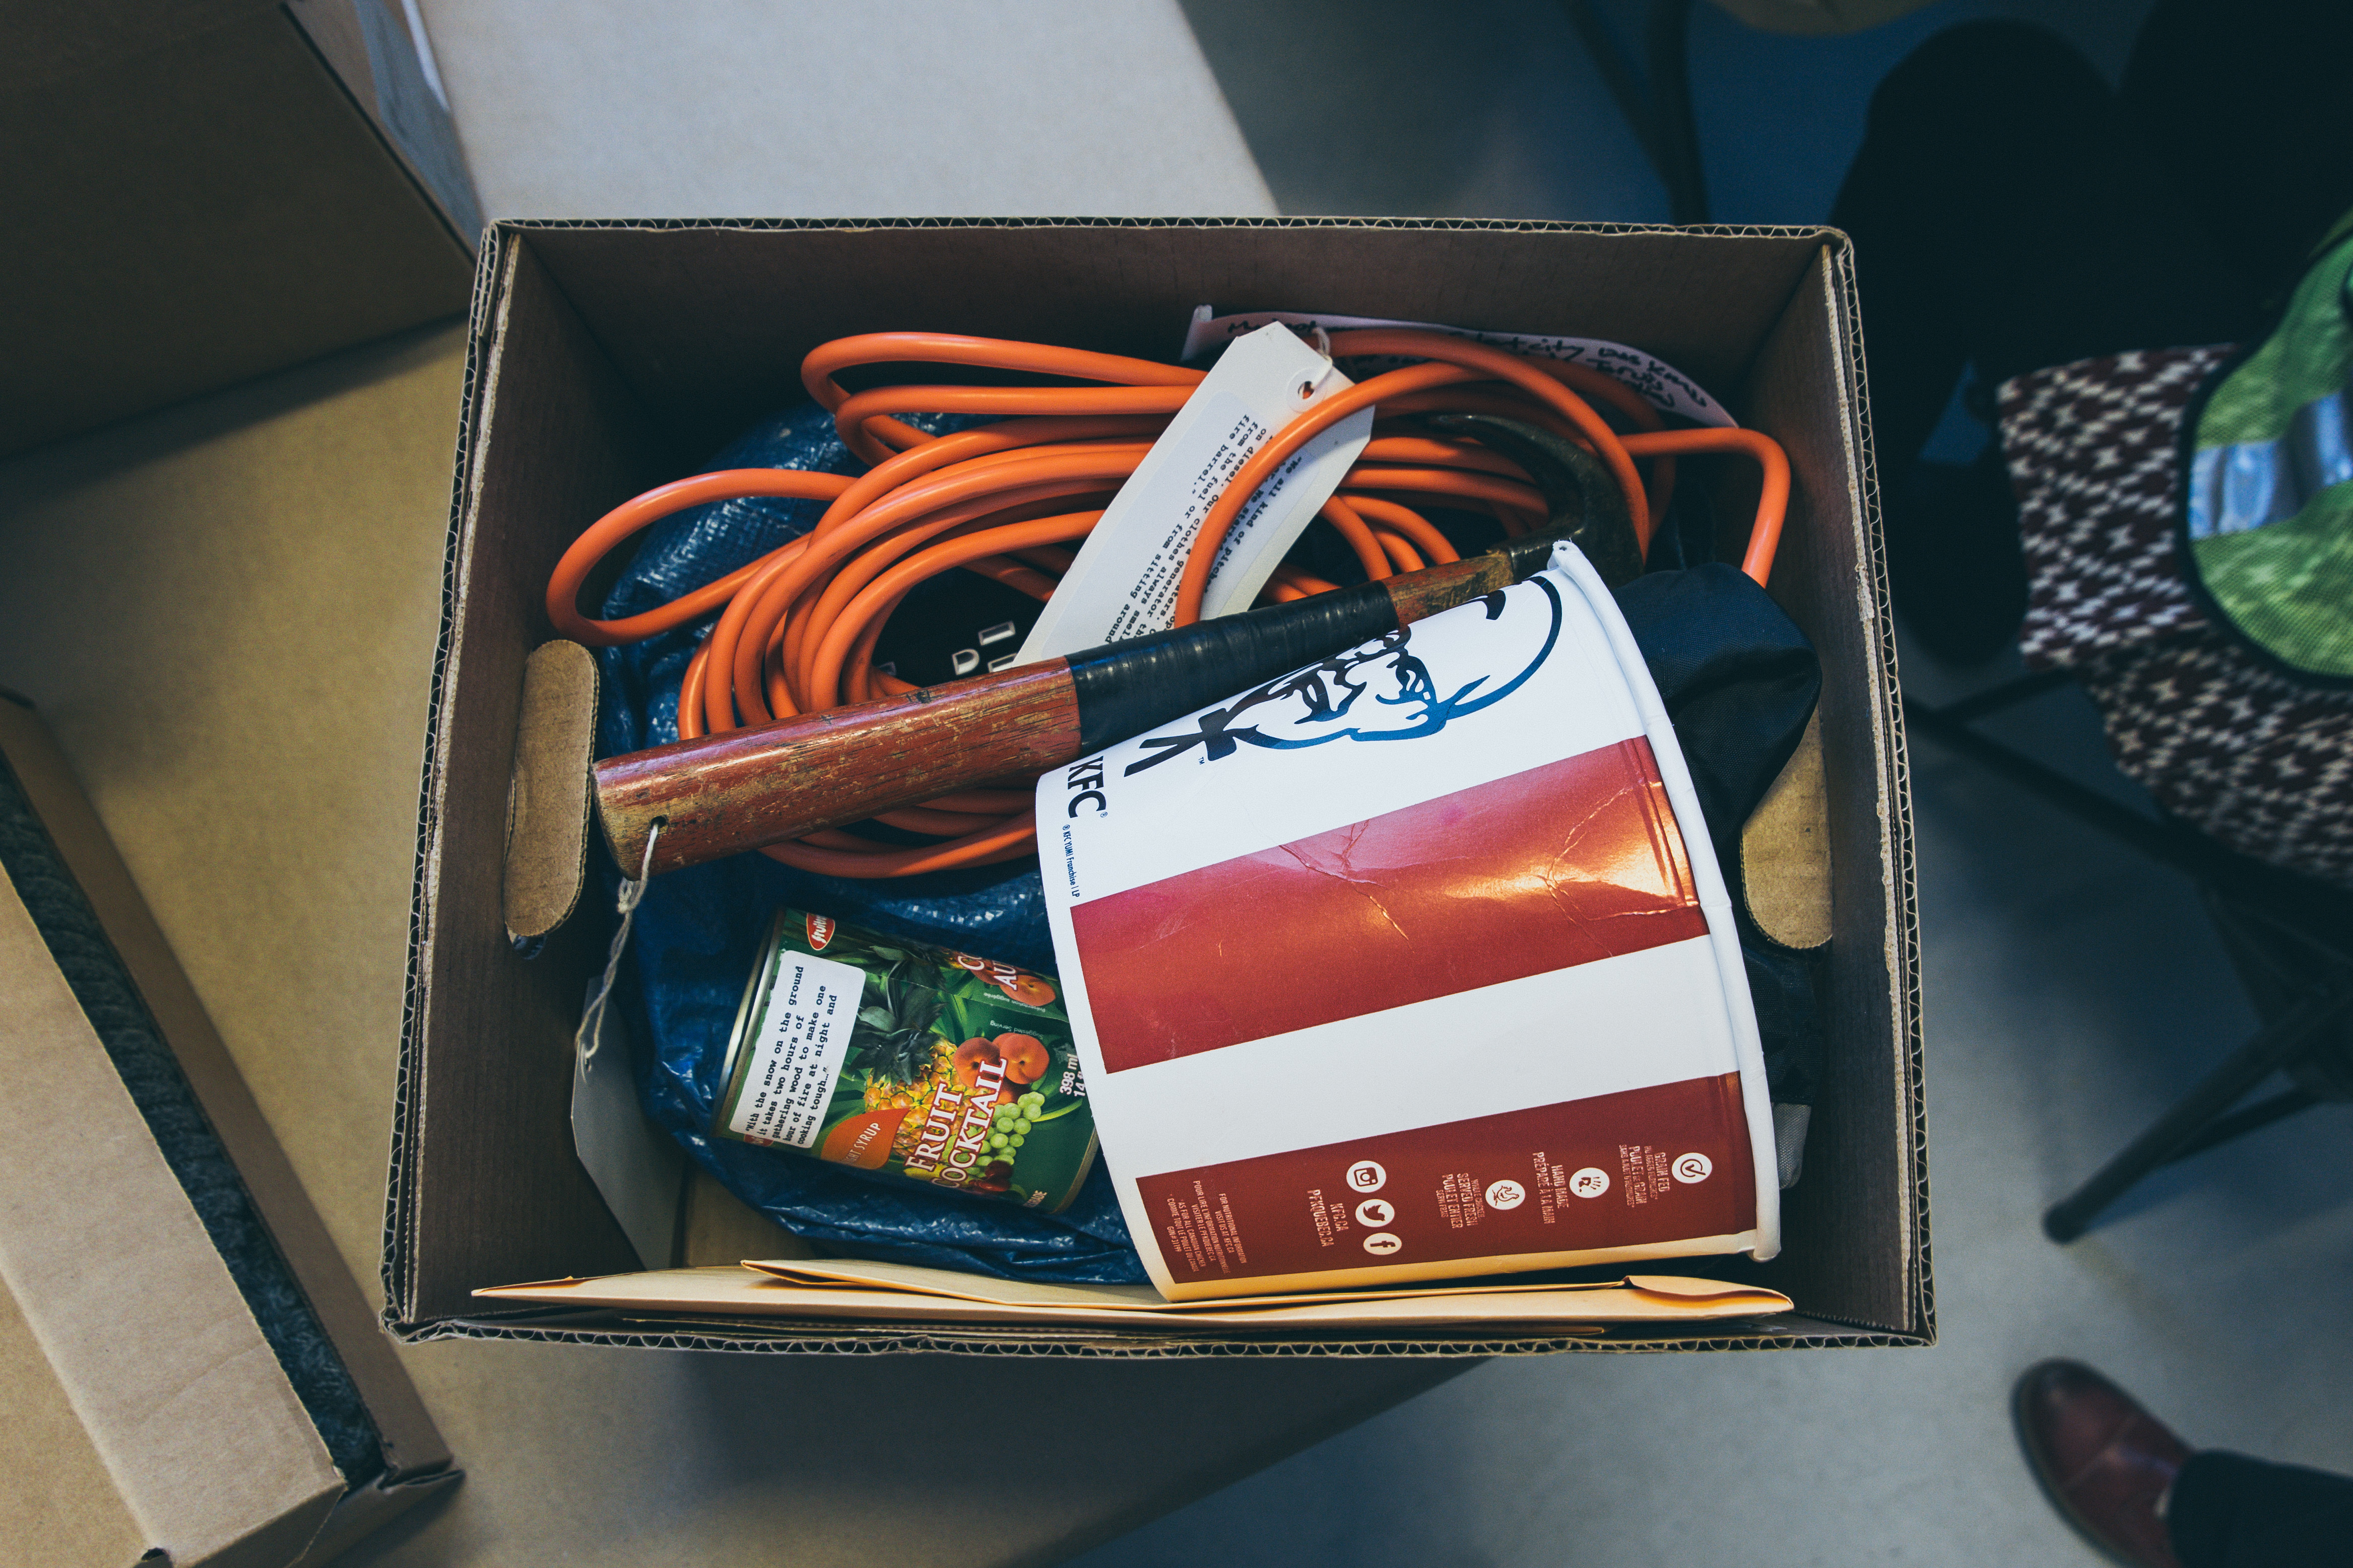 A box in the Tent City memory archive shows a KFC box, can of fruit, hammer, electrical cord. Photo credit: Nicole Brumley